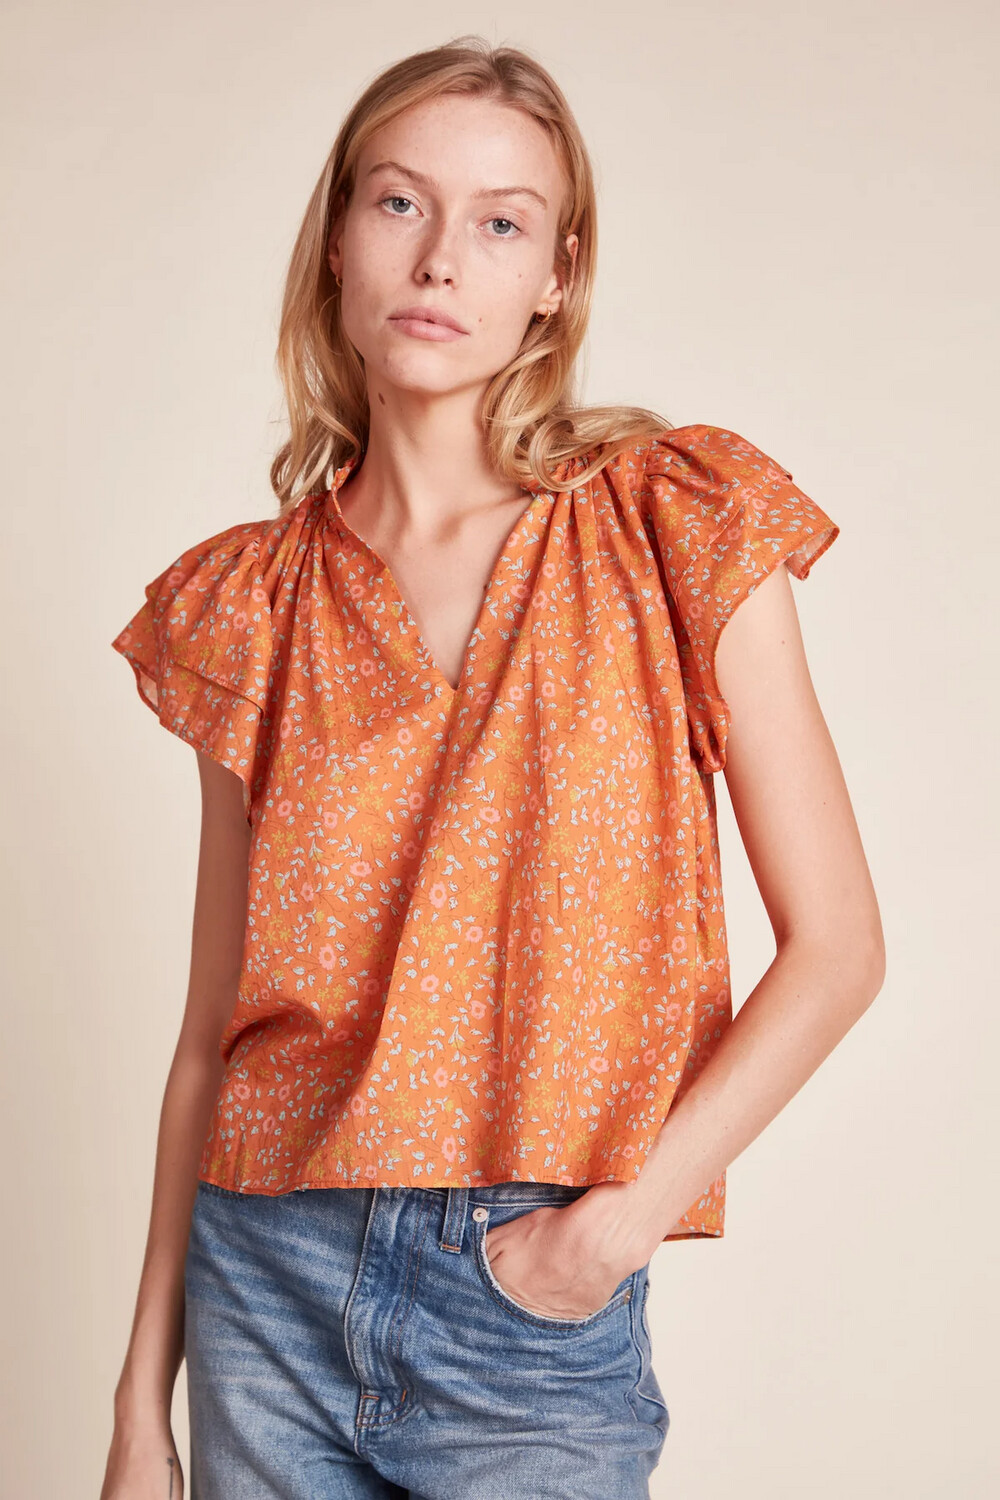 Trovata Clover Blouse in Turmeric Ivy